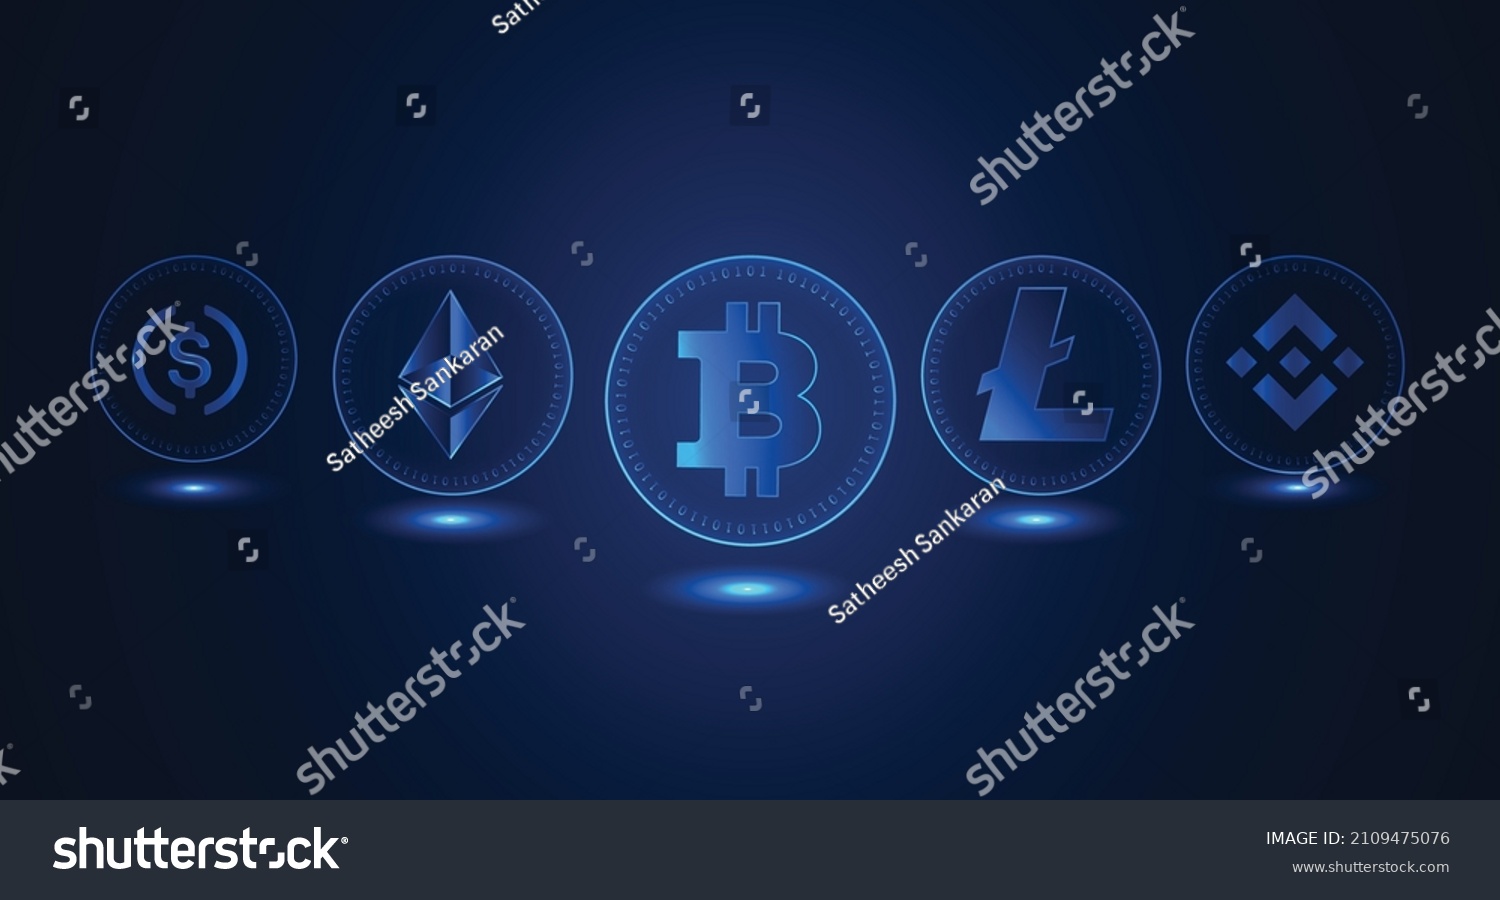 SVG of Set of top five cryptocurrency logo in futuristic style illustration vector. Bitcoin, ethereum, litecoin, binance coin and USDT coin  svg